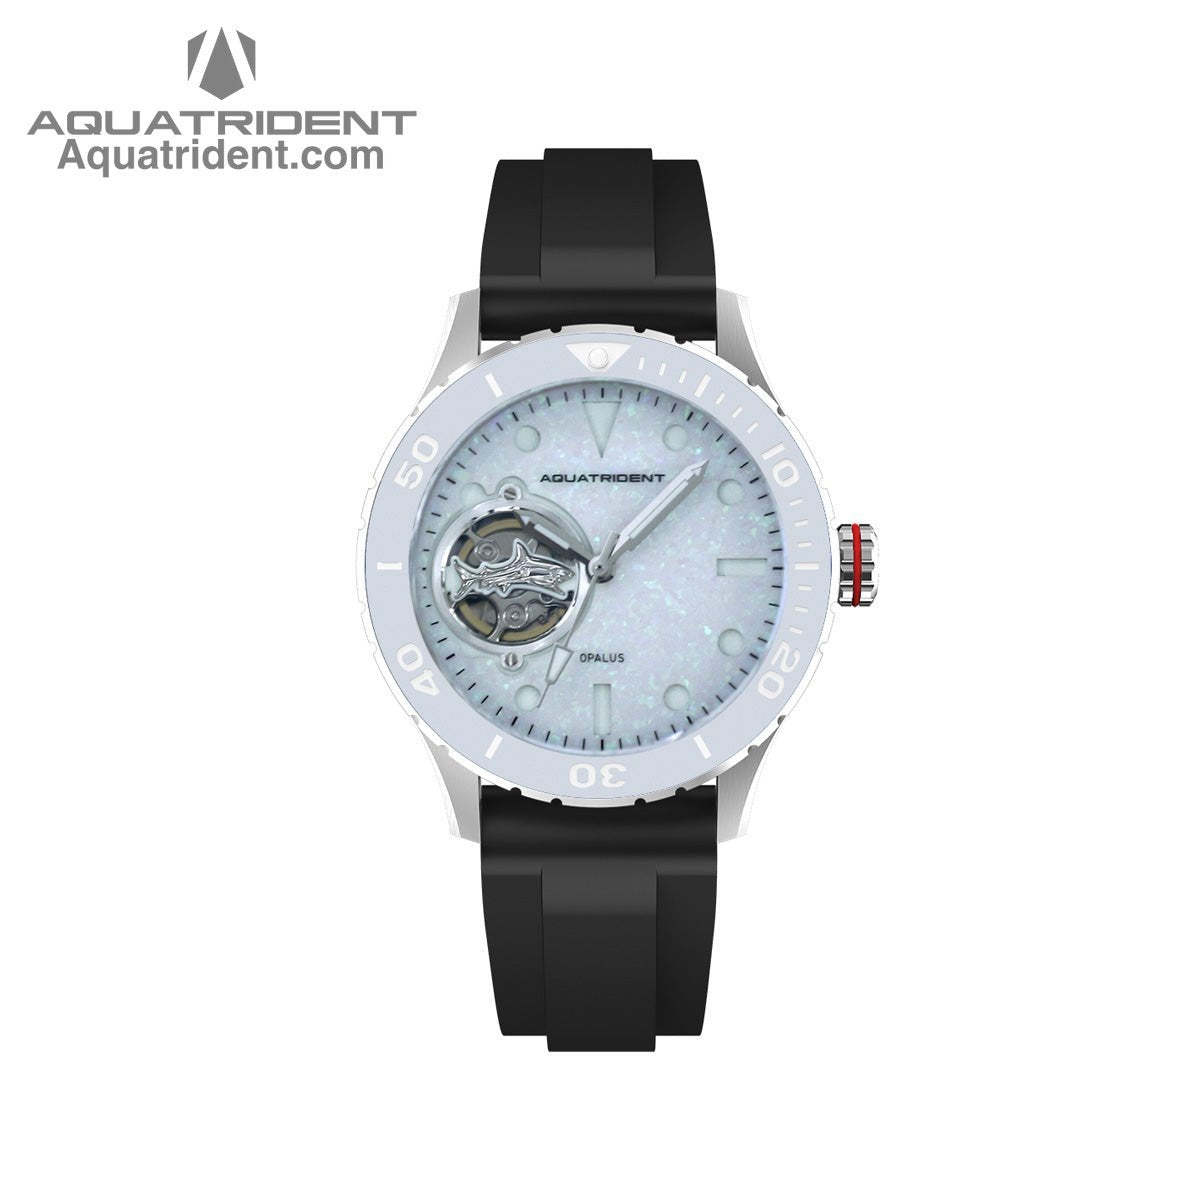 Aquatrident's Ocean Automatic Watch with Ceramic，Rotating, 120 clicks Bezel and azure opal Dial front view